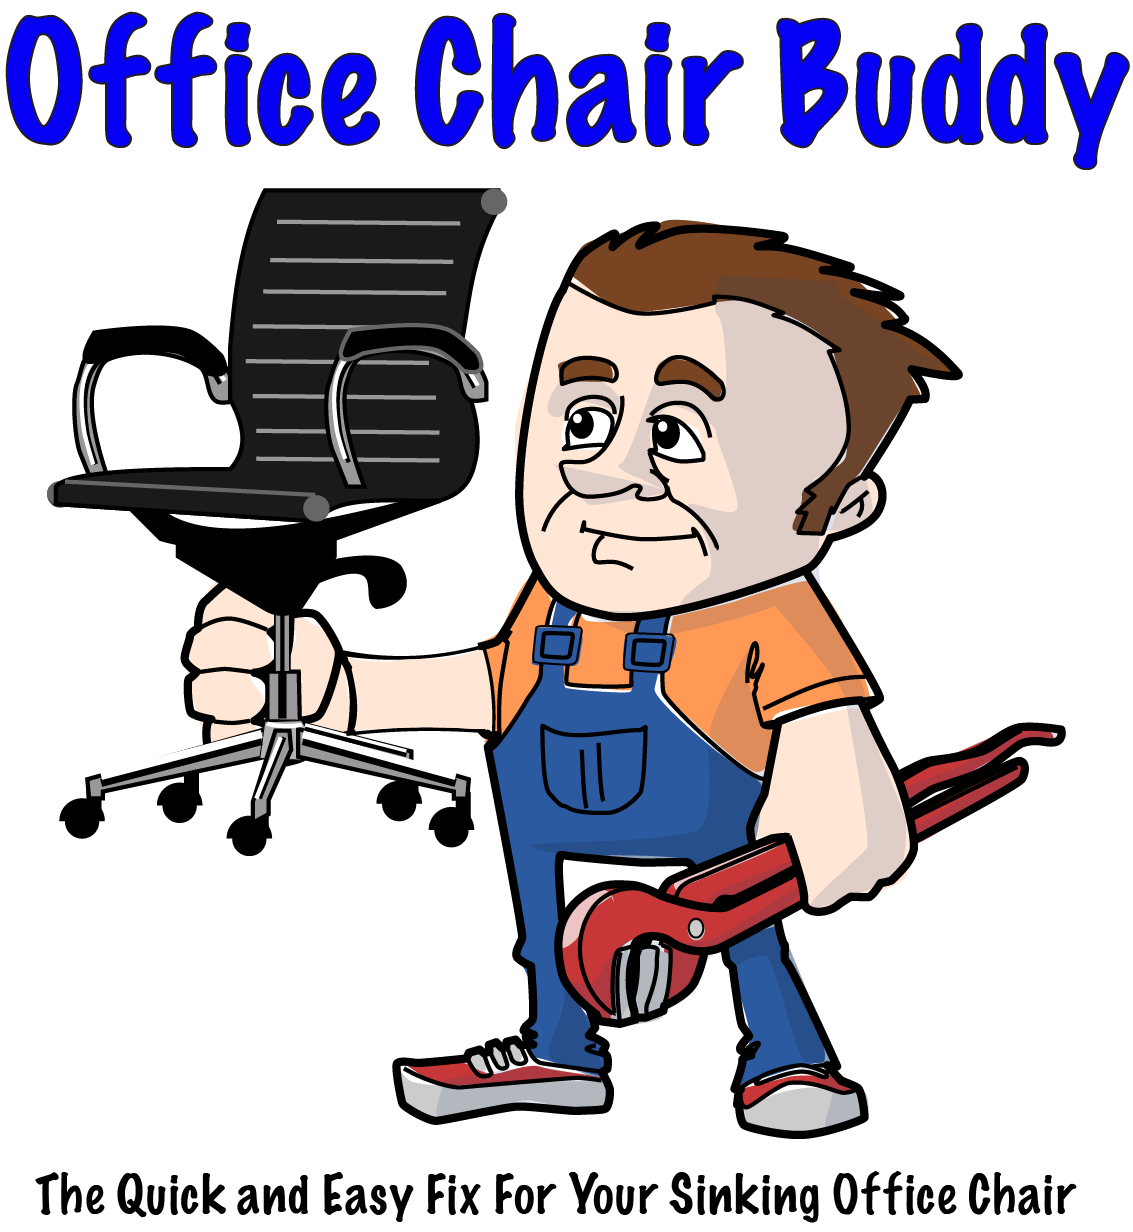 Office Chair Buddy – Fix Your Sinking Office Chair With Our Simple Saver Kit